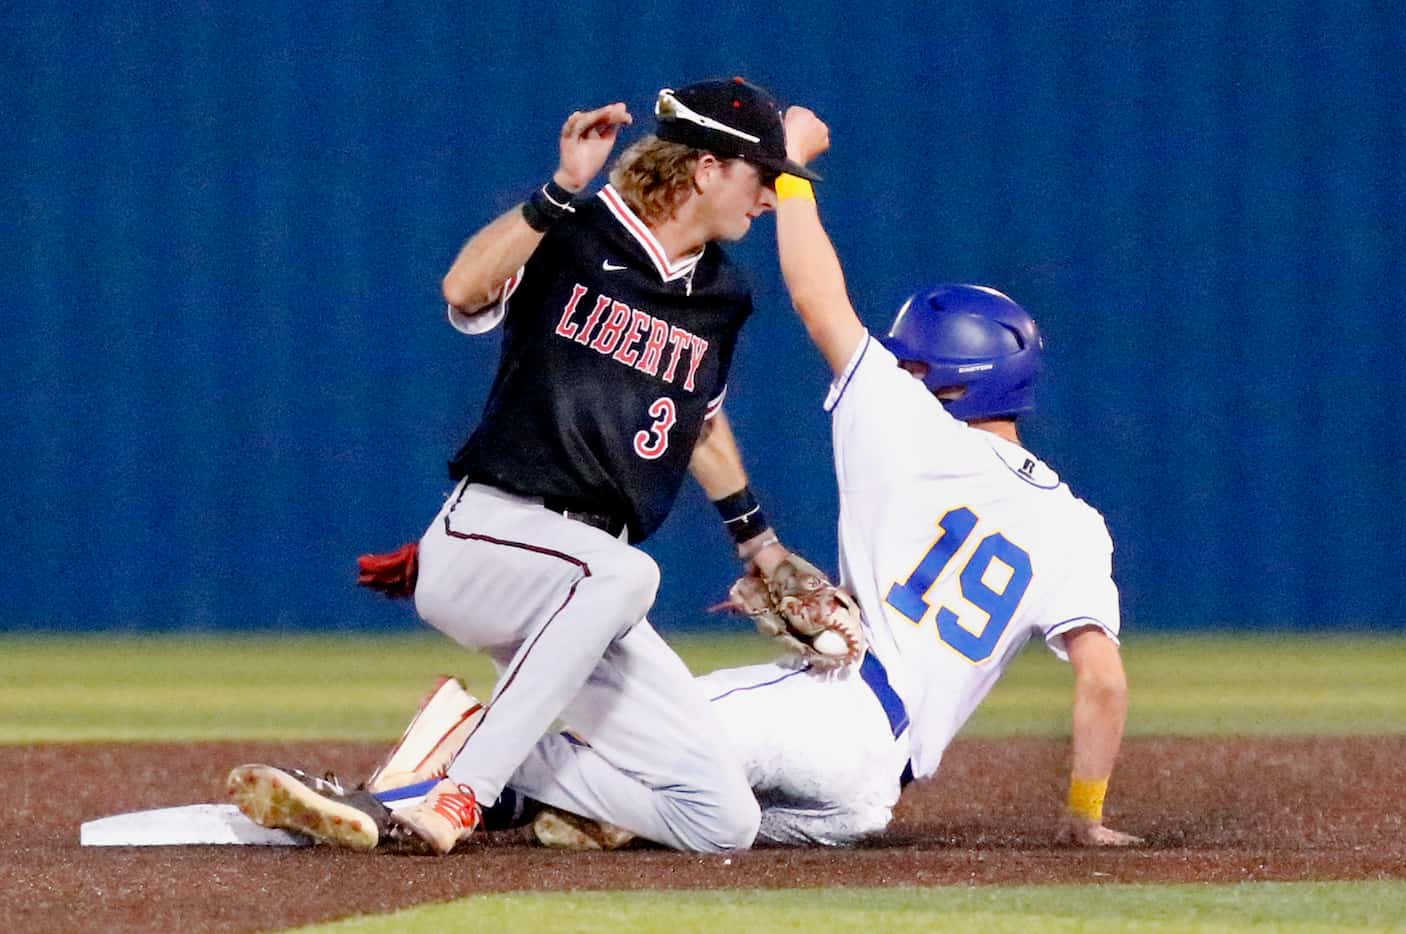 Liberty shortstop Cade McGarrh (3) wasn’t able to get the tag in time to get Frisco base...